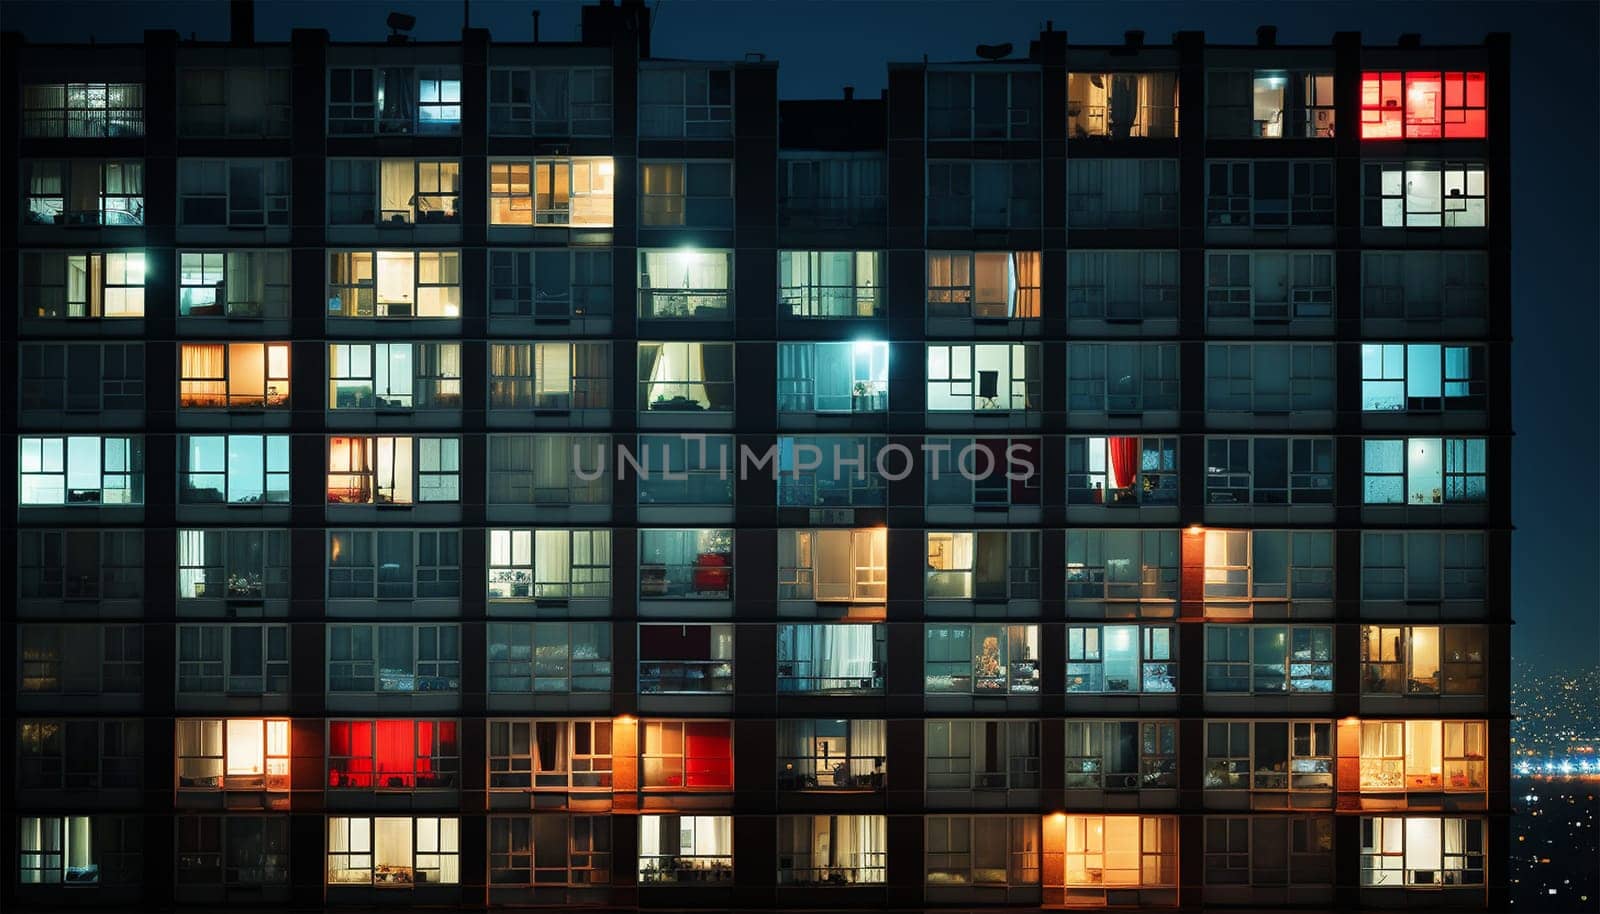 Apartment building by night. Lights in windows. windows building front facade by night in the city night shot of building colorful lights by Annebel146